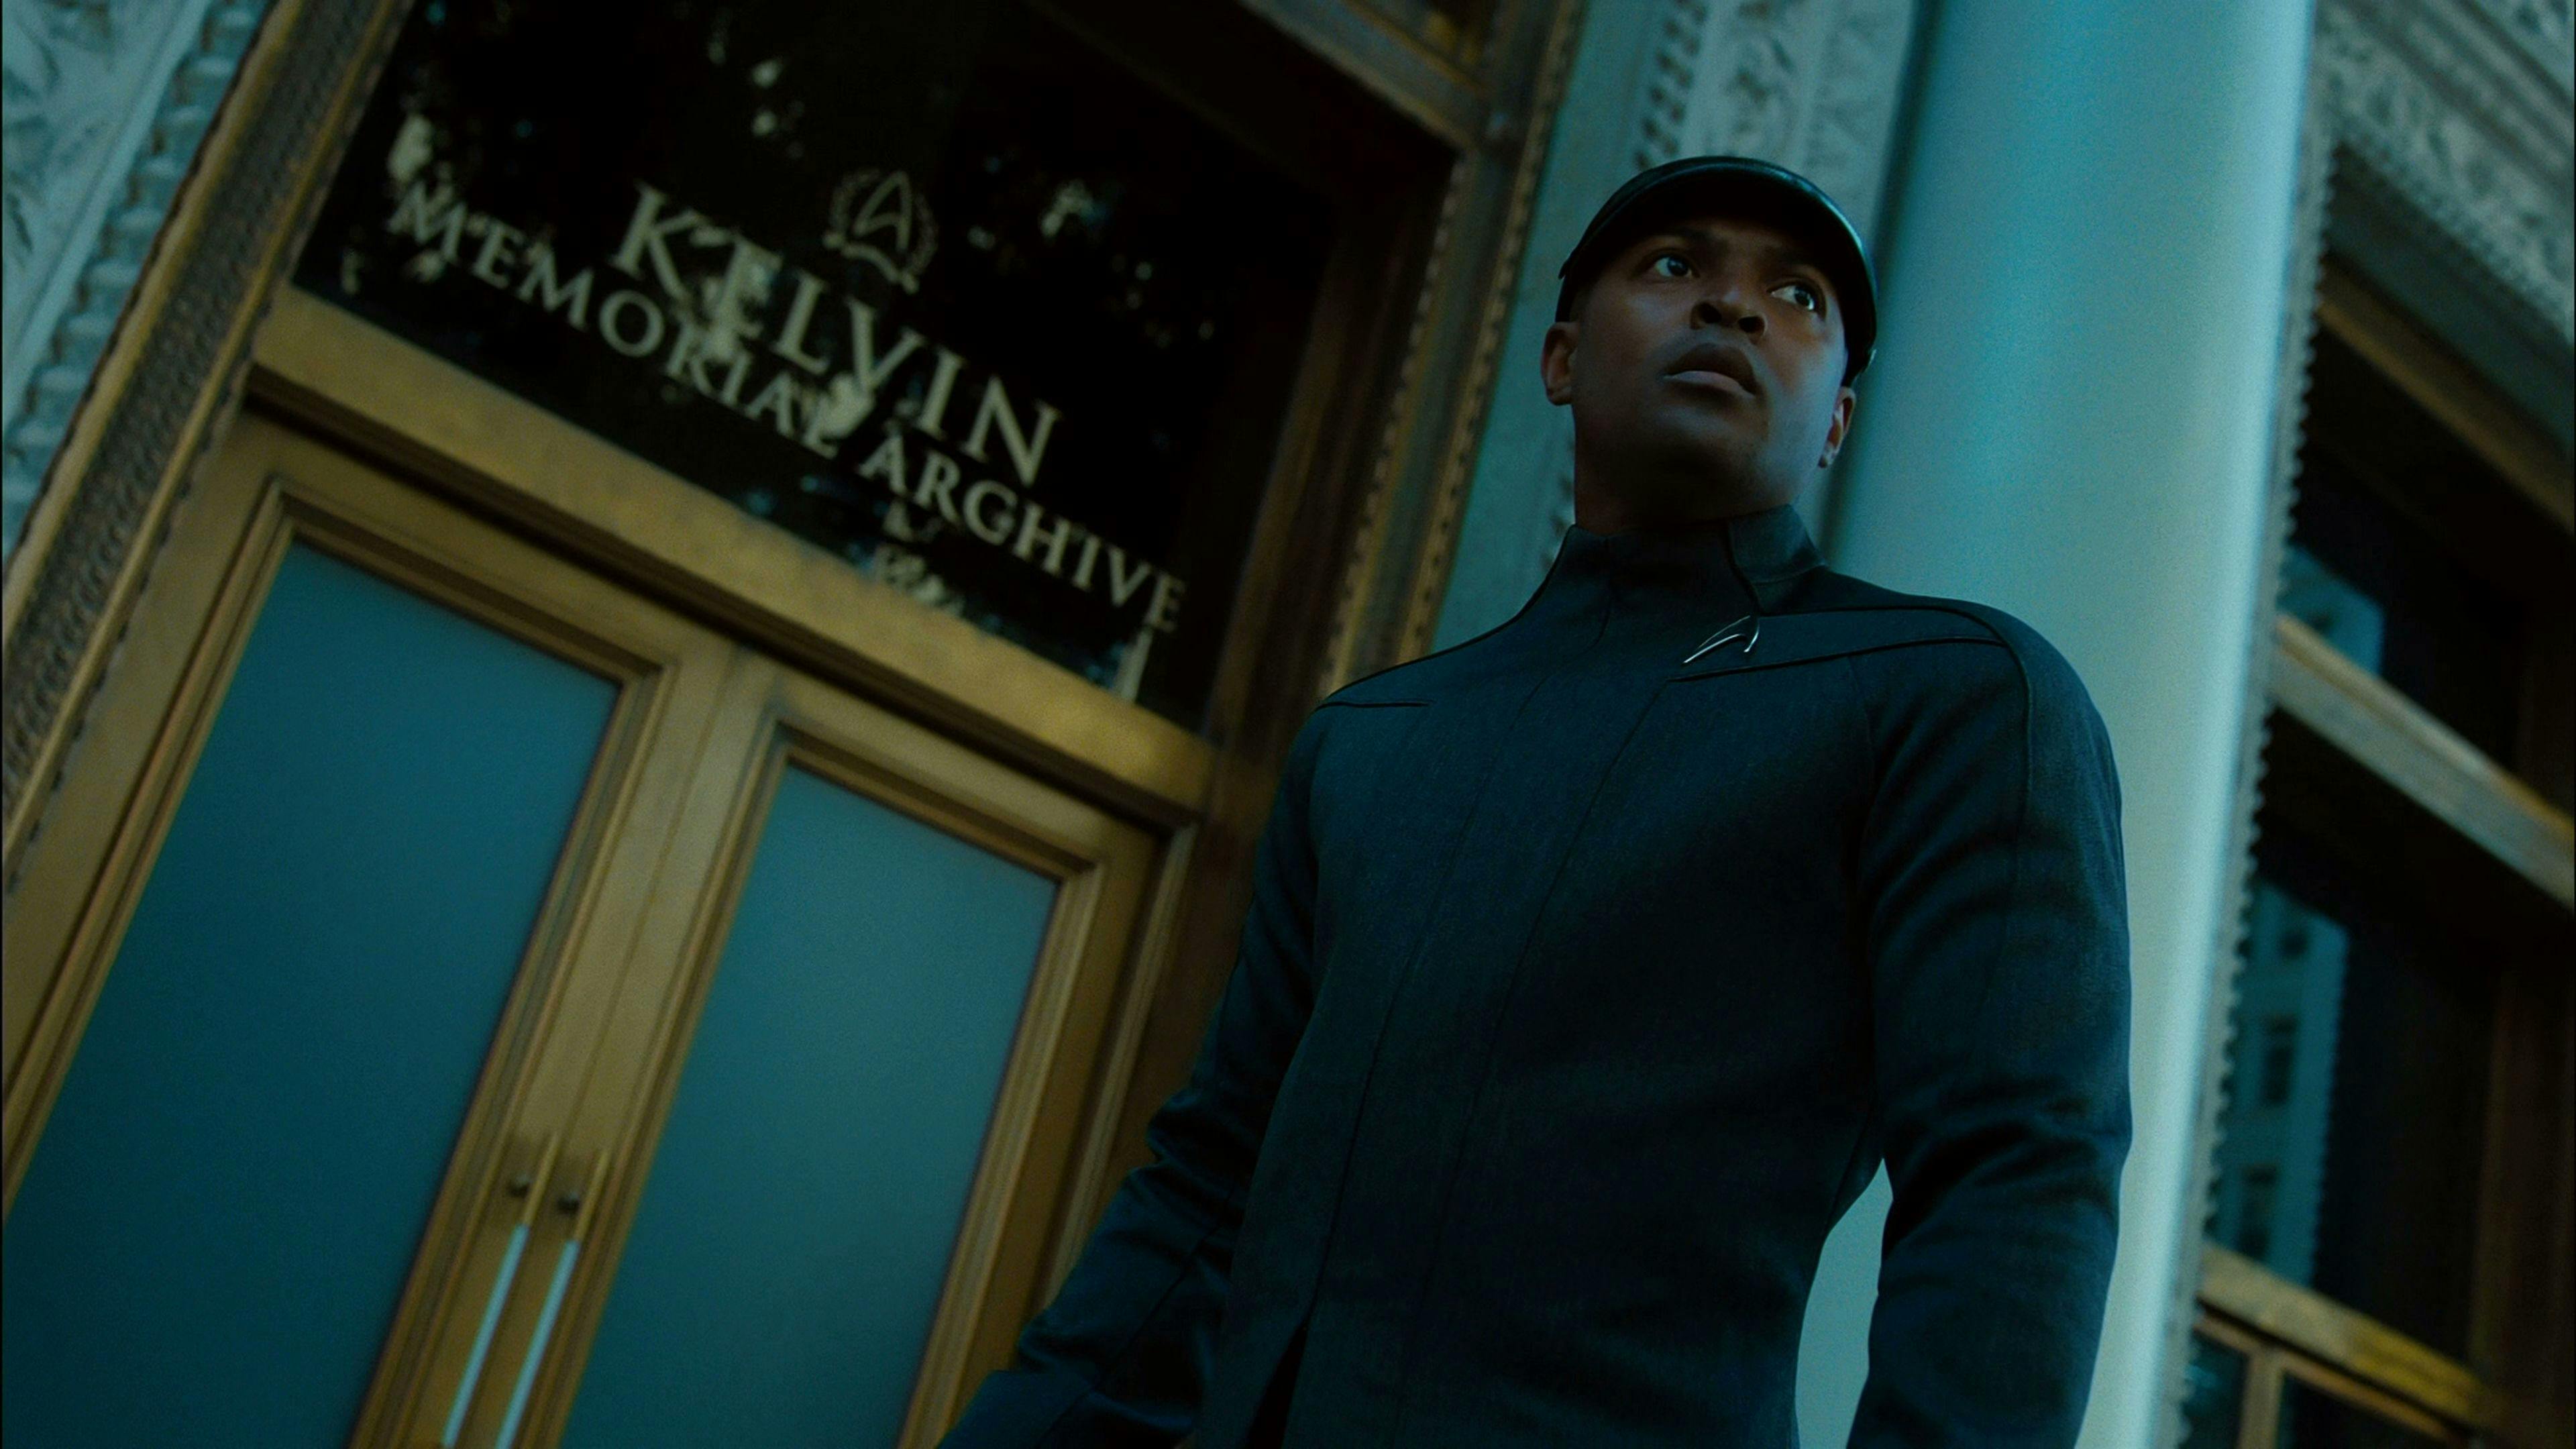 Thomas Harewood pauses in front of the Kelvin Memorial Archive as he looks over his shoulder in Star Trek Into Darkness